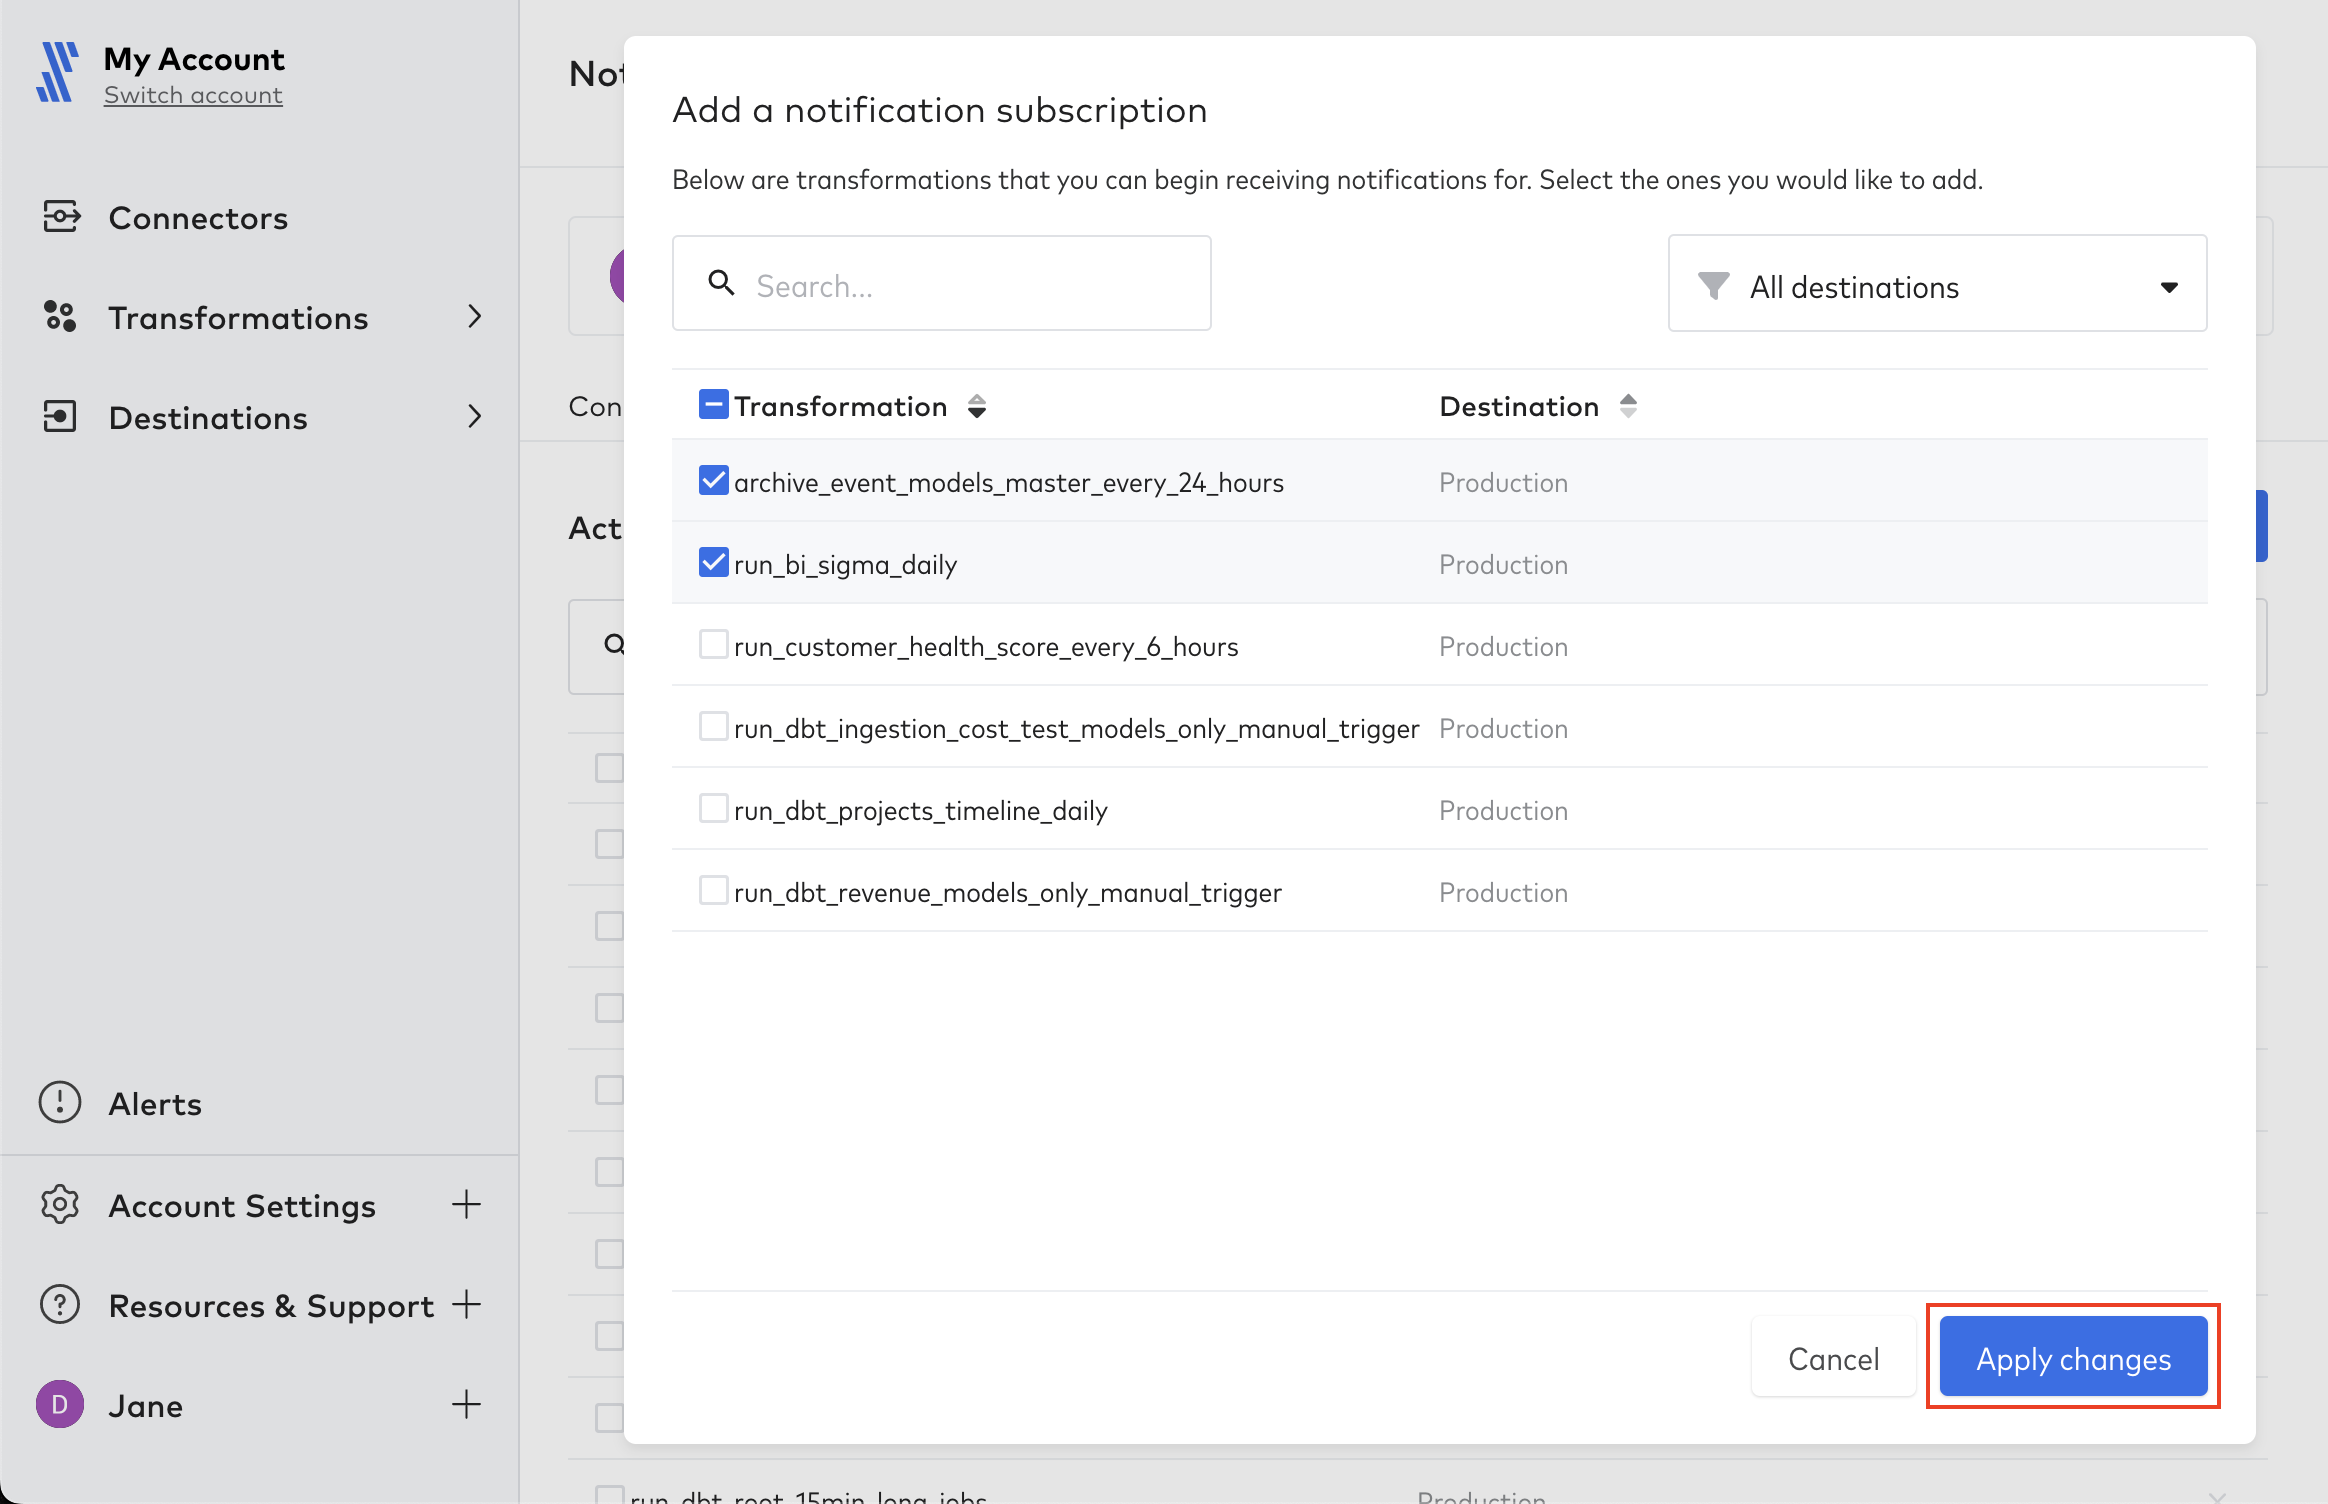 Add transformations to notification subscription